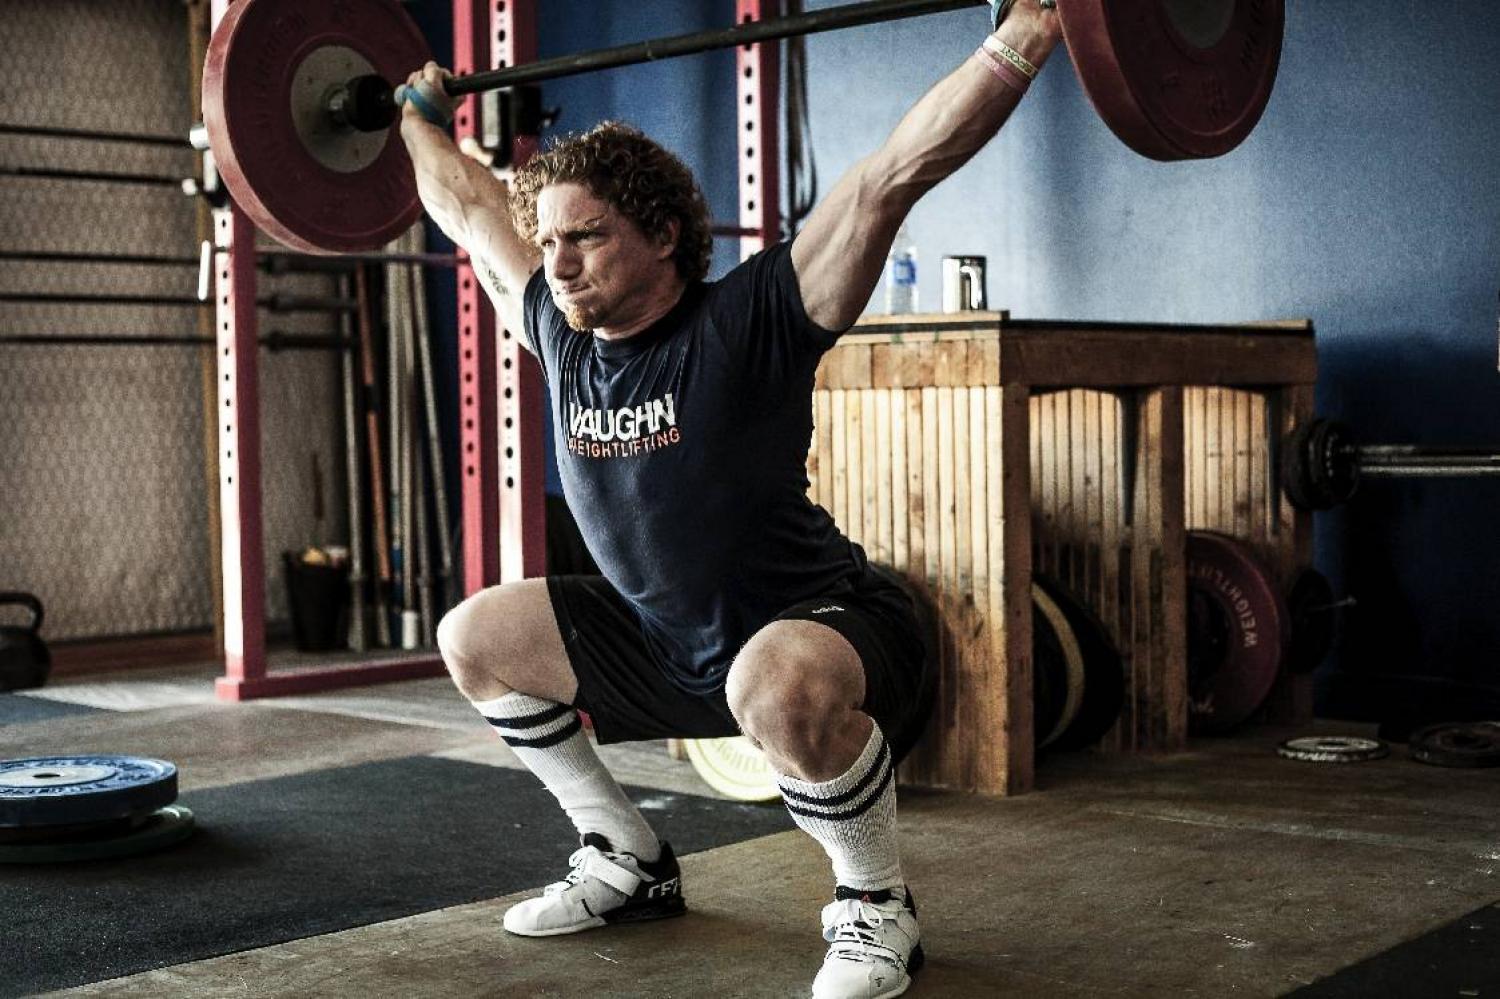 Olympic weightlifting back to basics